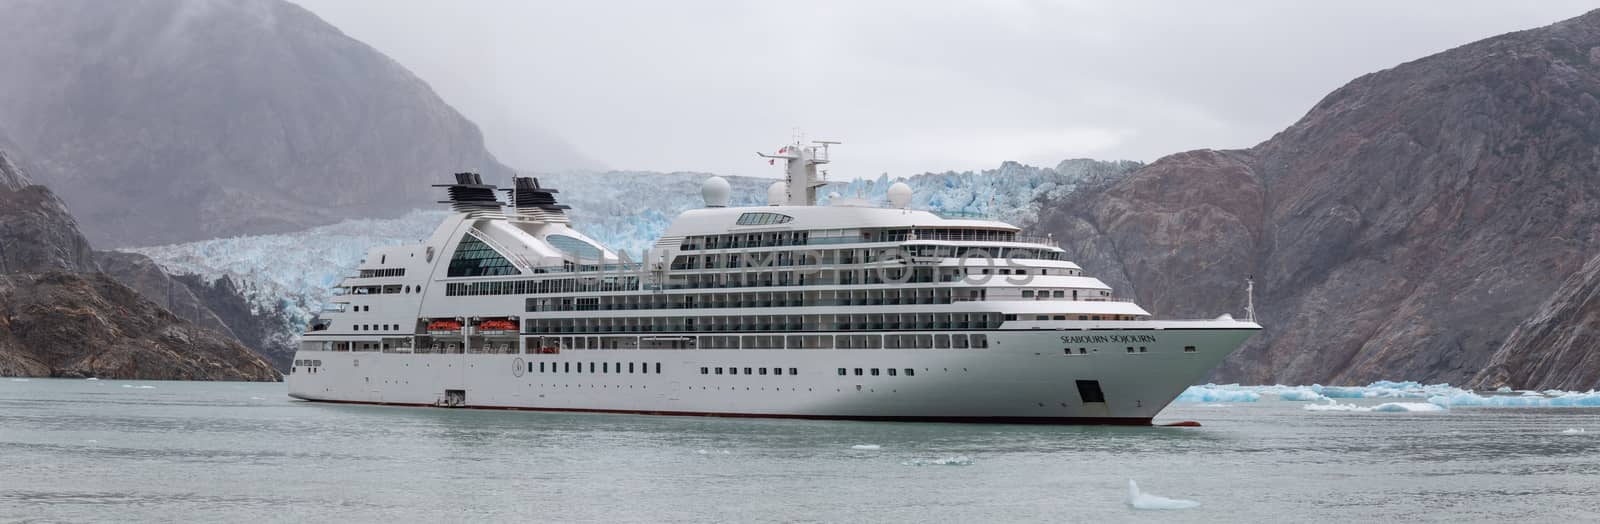 Seabourn Sojourn cruise ship drifting in fjord by DamantisZ